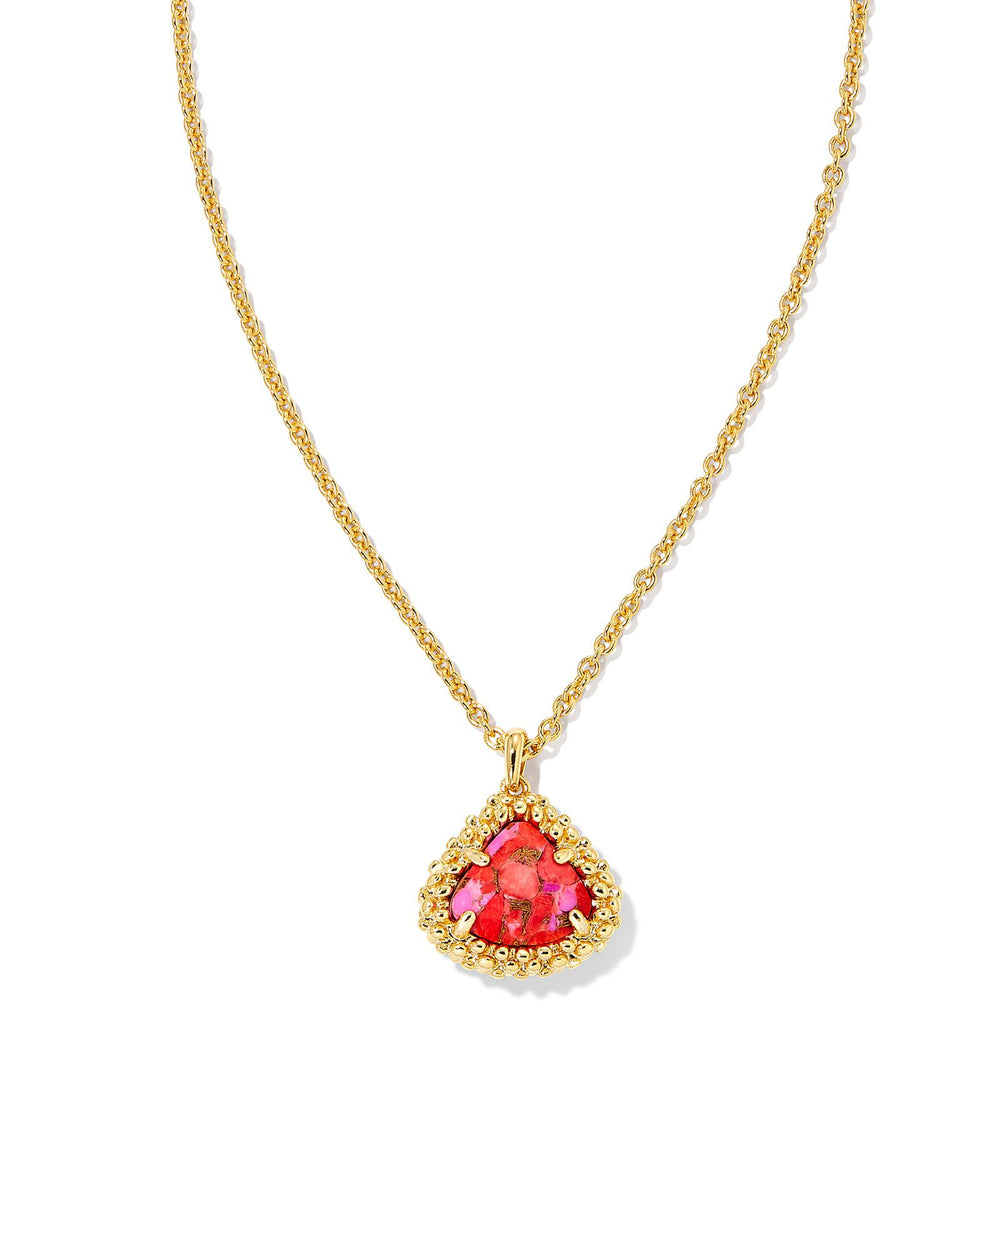 Framed Kendall Short Gold Pendant Necklace in Gold Bronze Vined Red Fuchsia